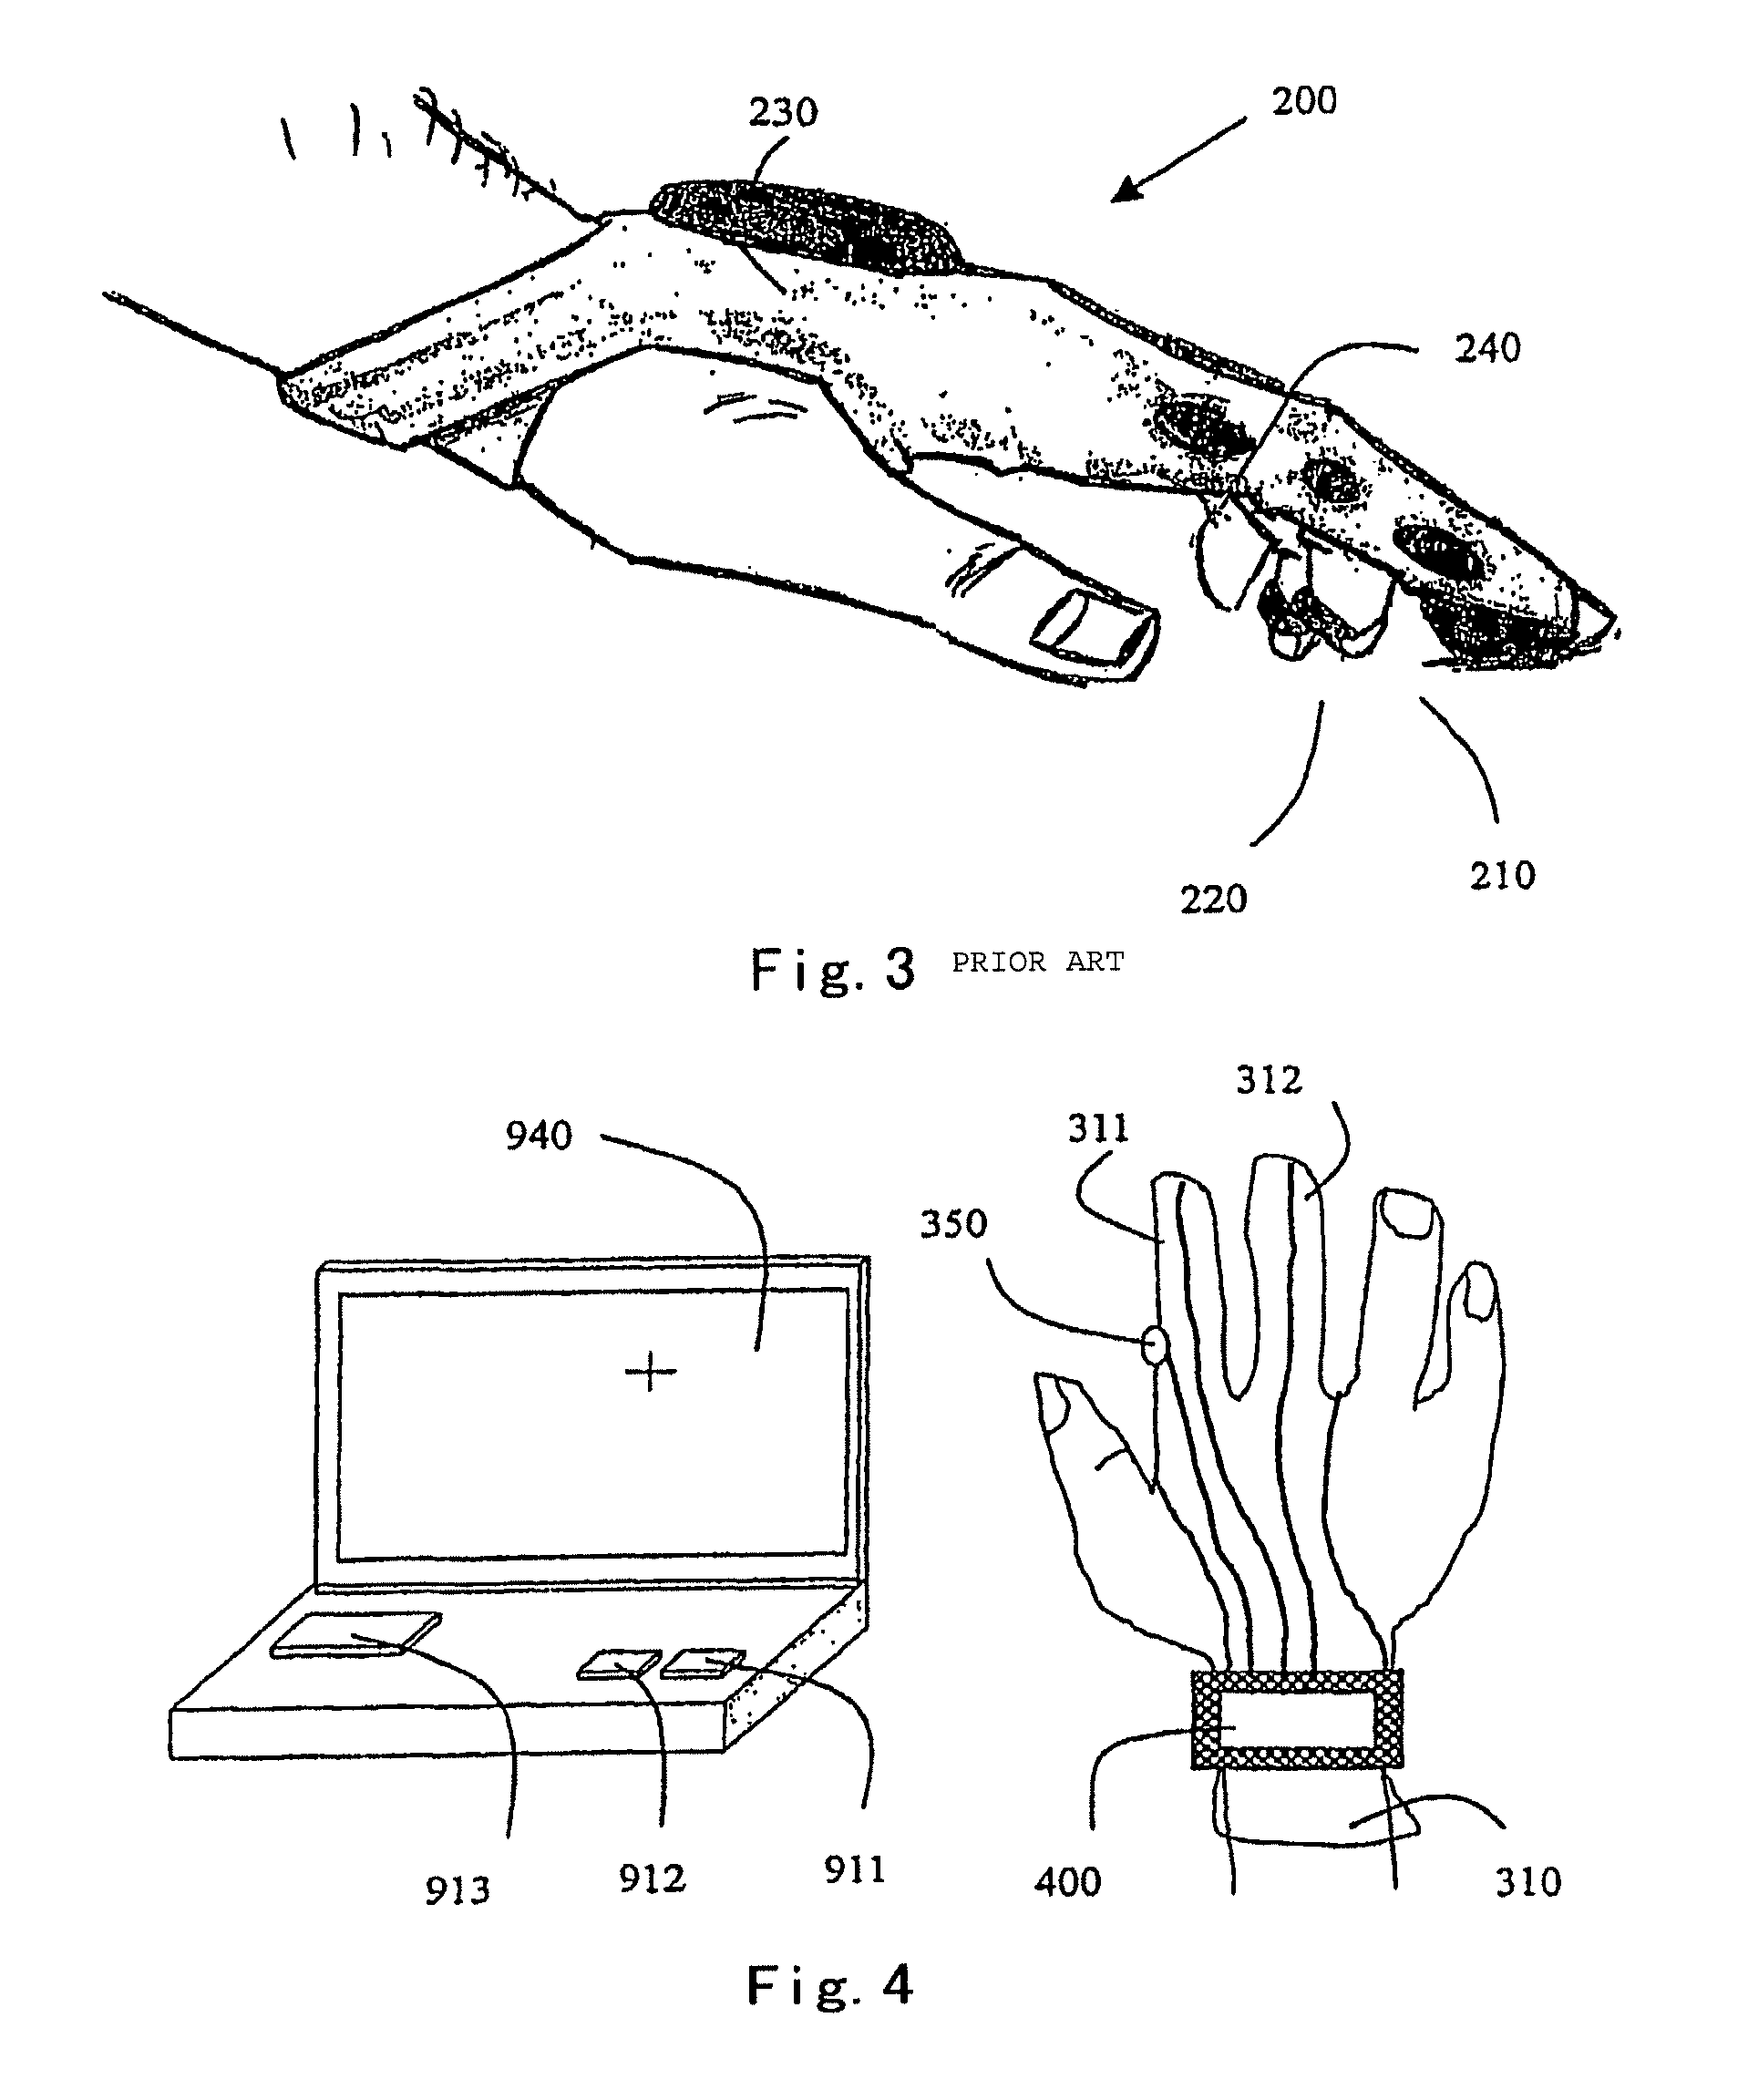 Wearable signal input apparatus for data processing system